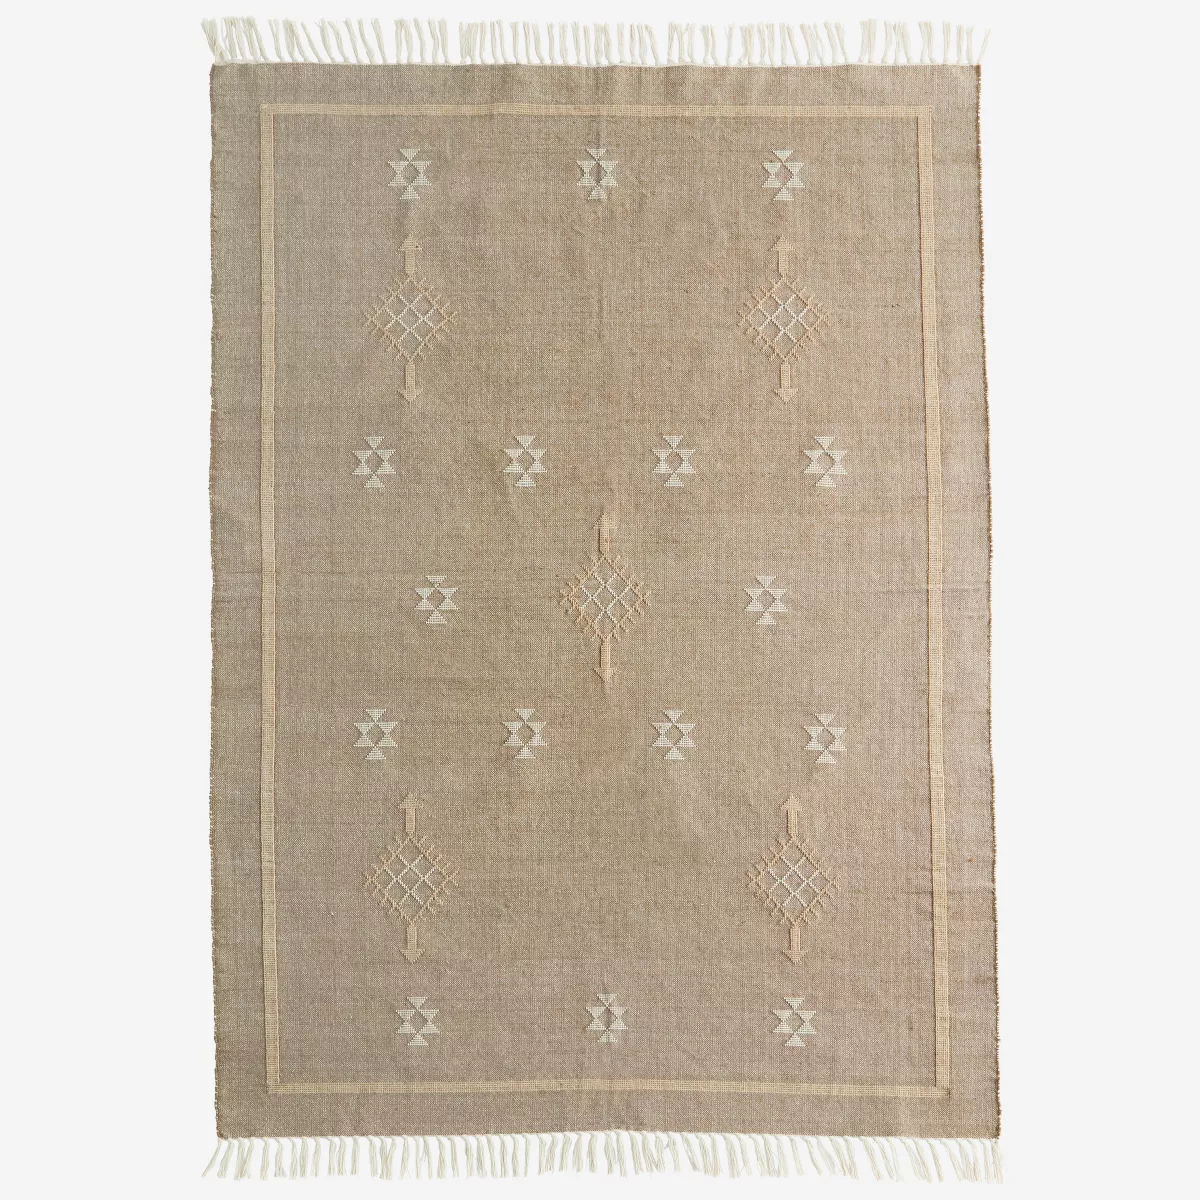 Handwoven Embroidered Cotton Rug